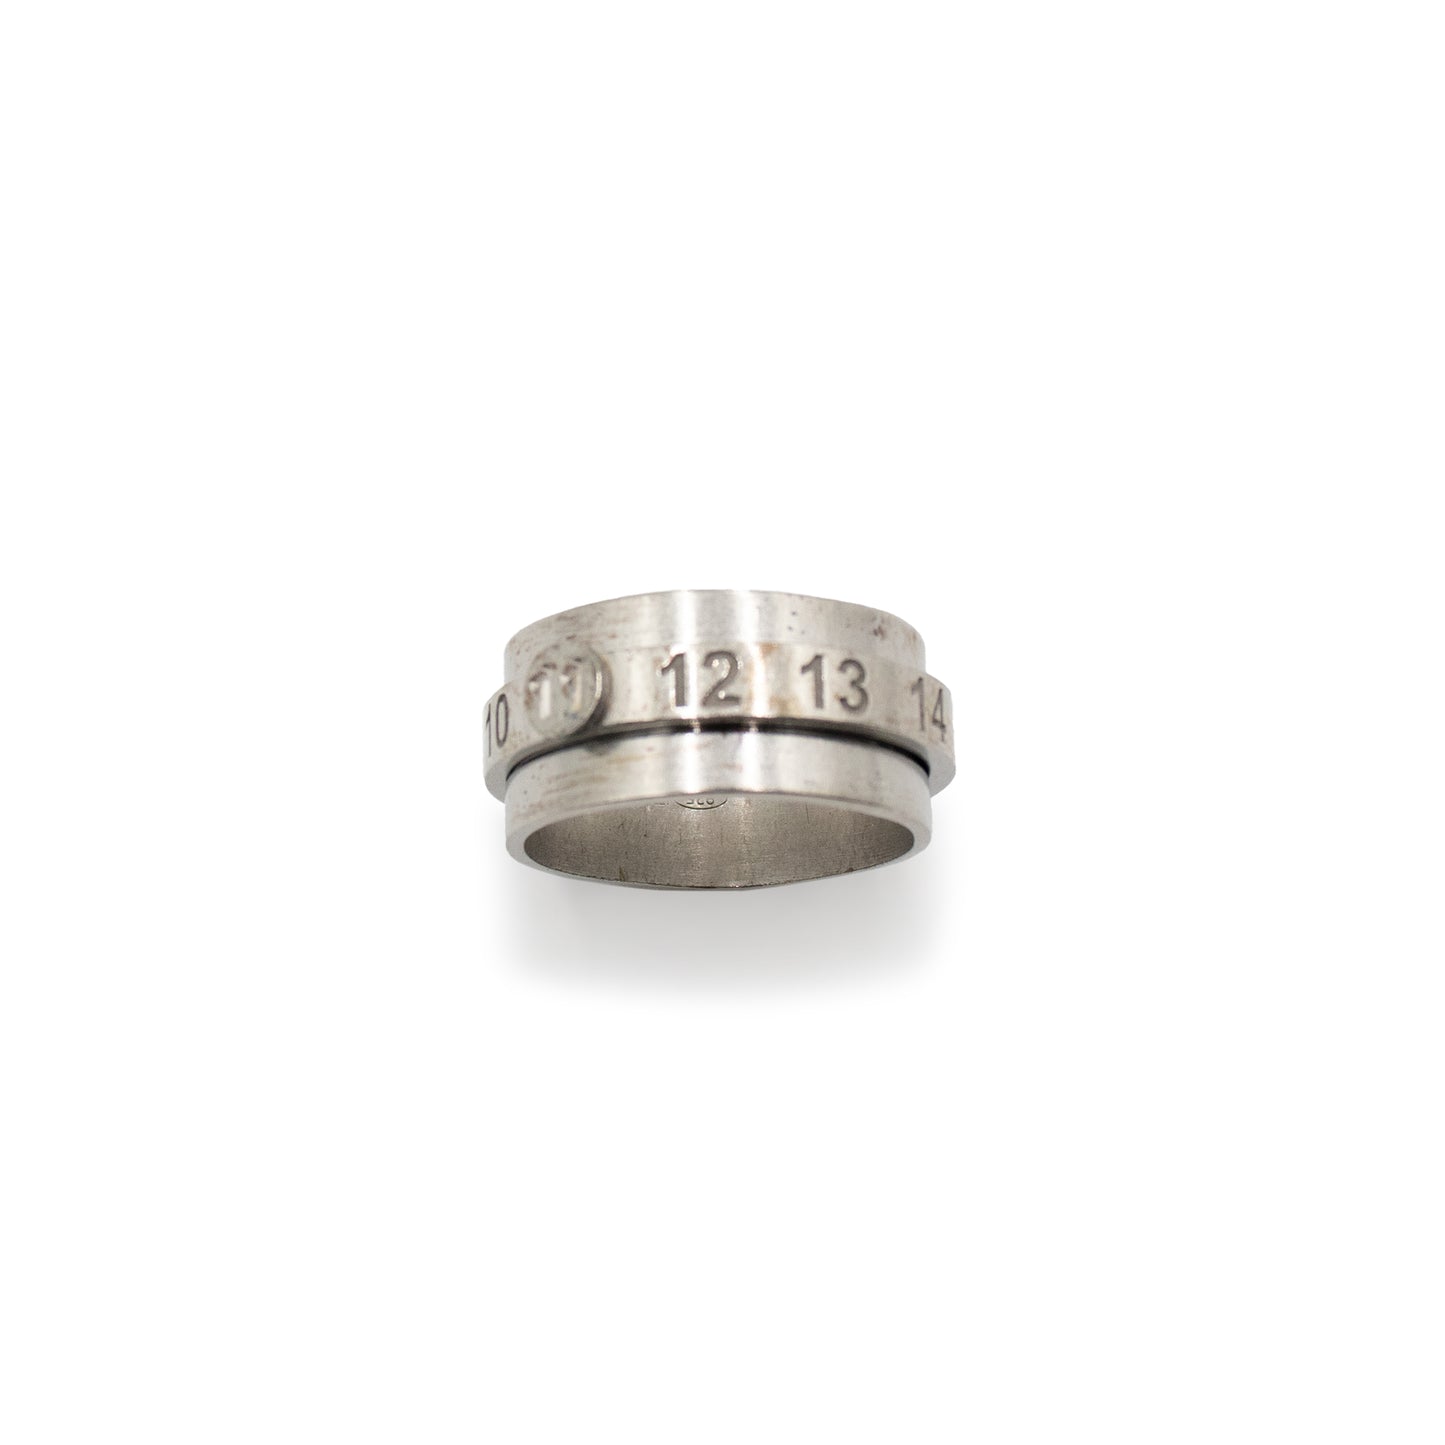 Number Engraved Ring in Silver